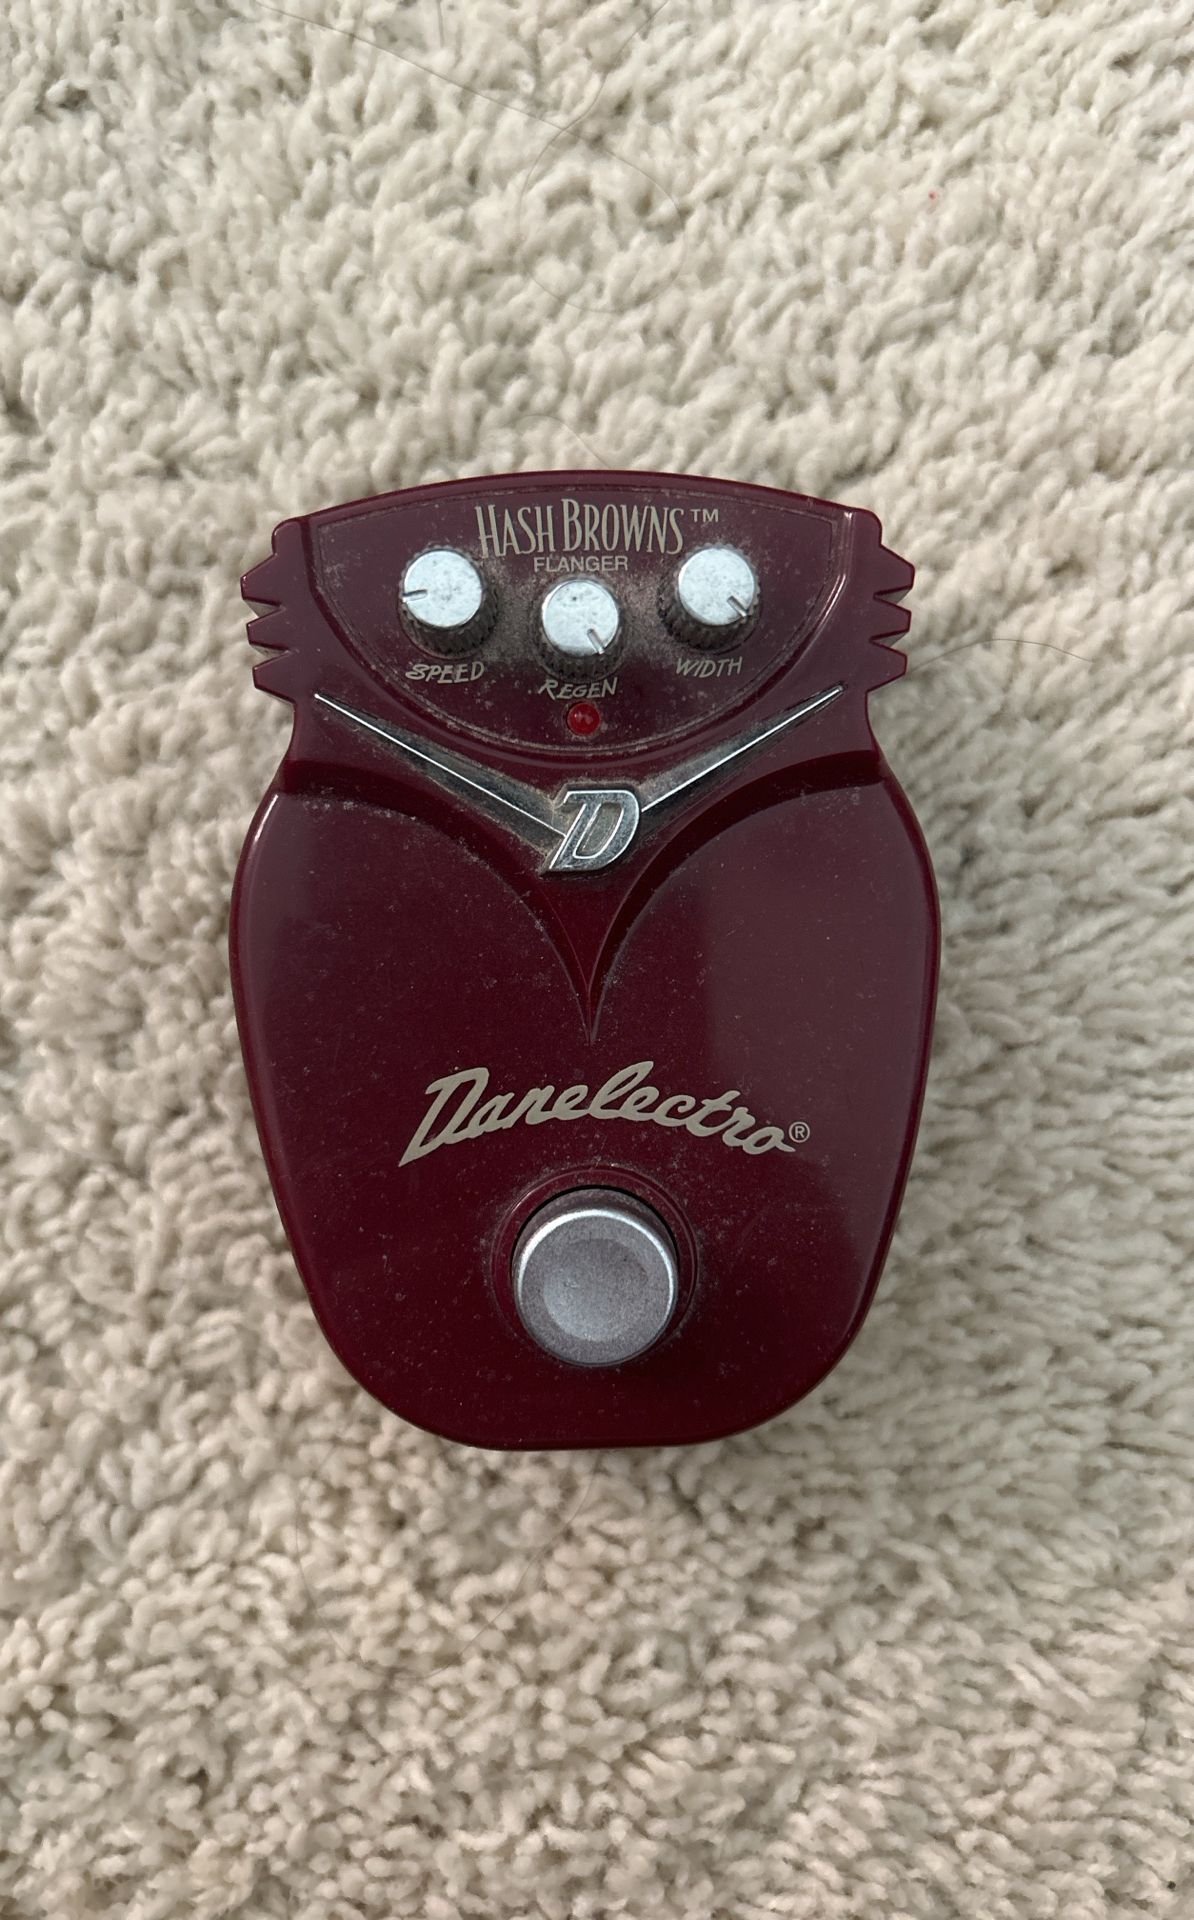 Danelectro Hashbrowns Flanger Pedal